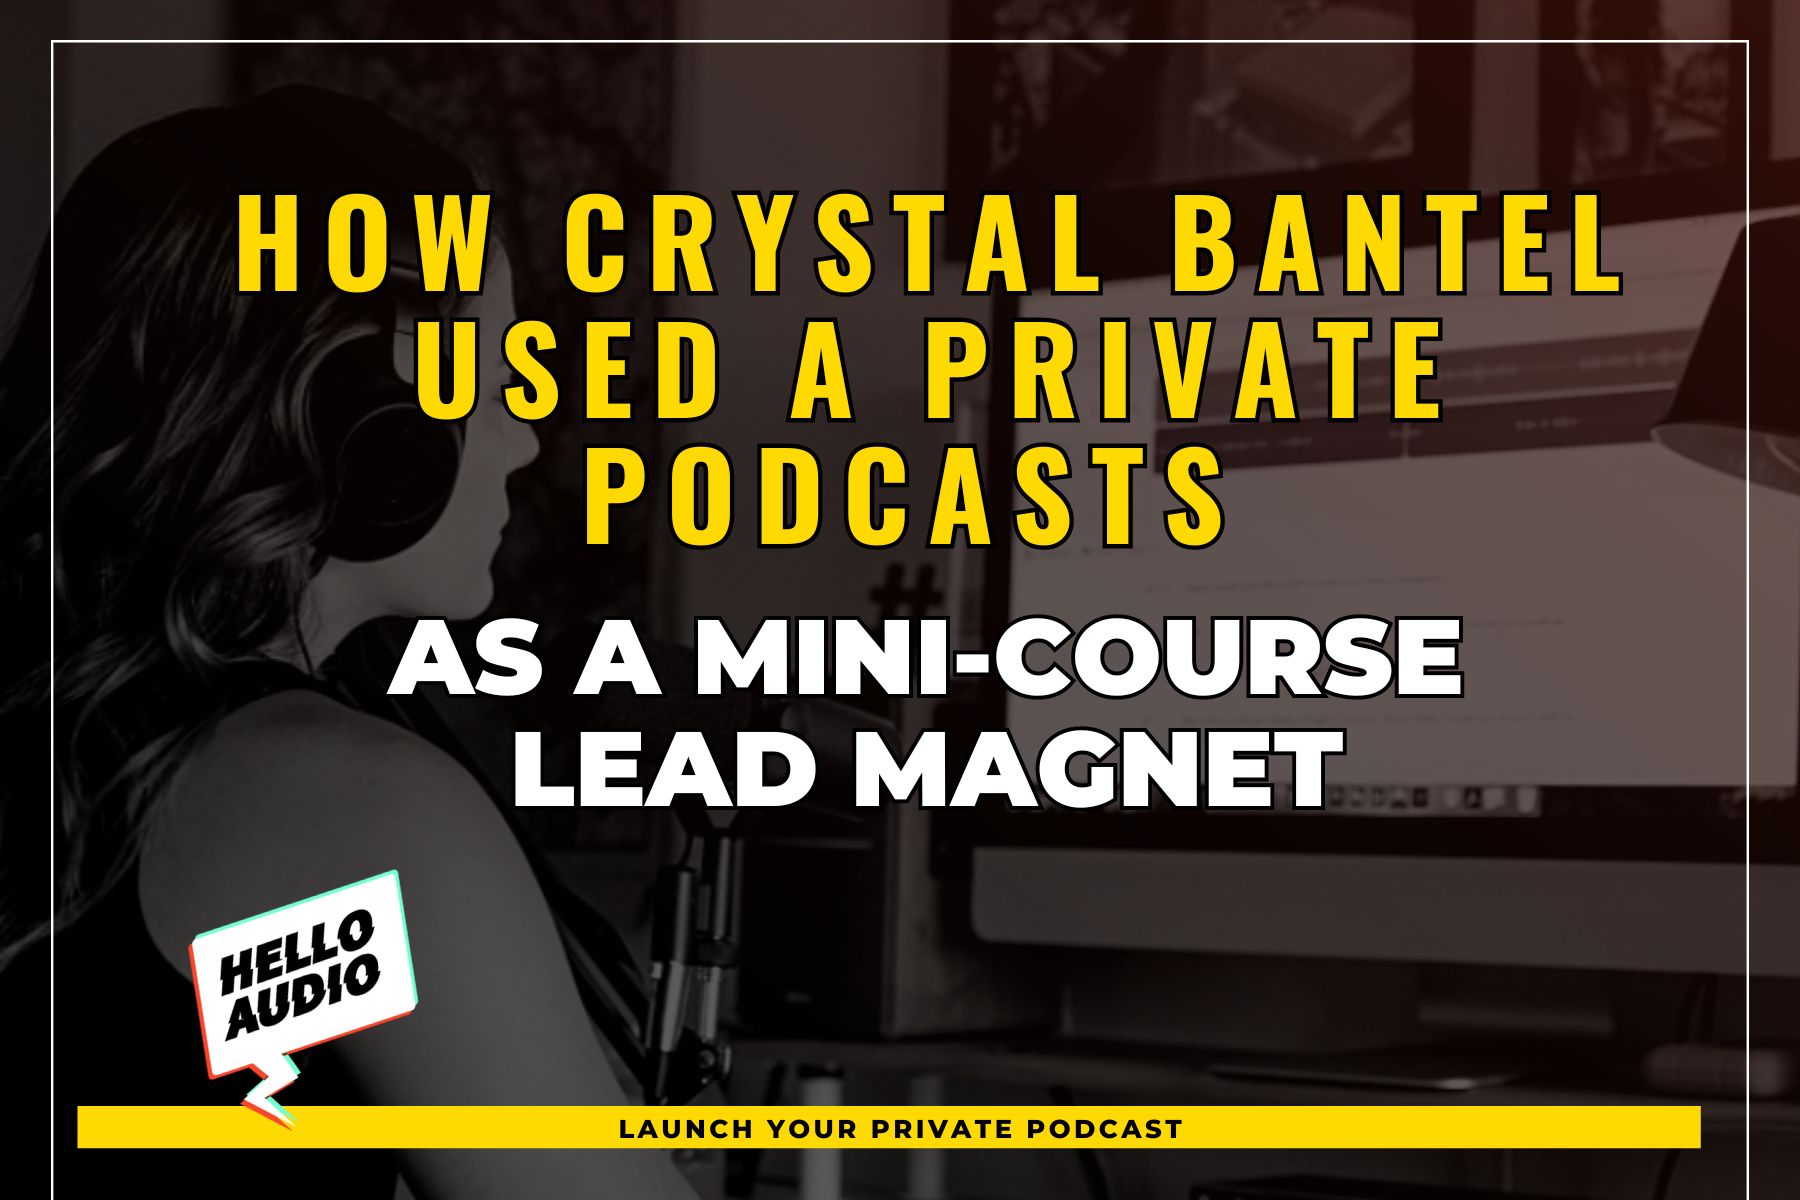 How Crystal Bantel Used a Private Podcasts as a Mini-Course Lead Magnet